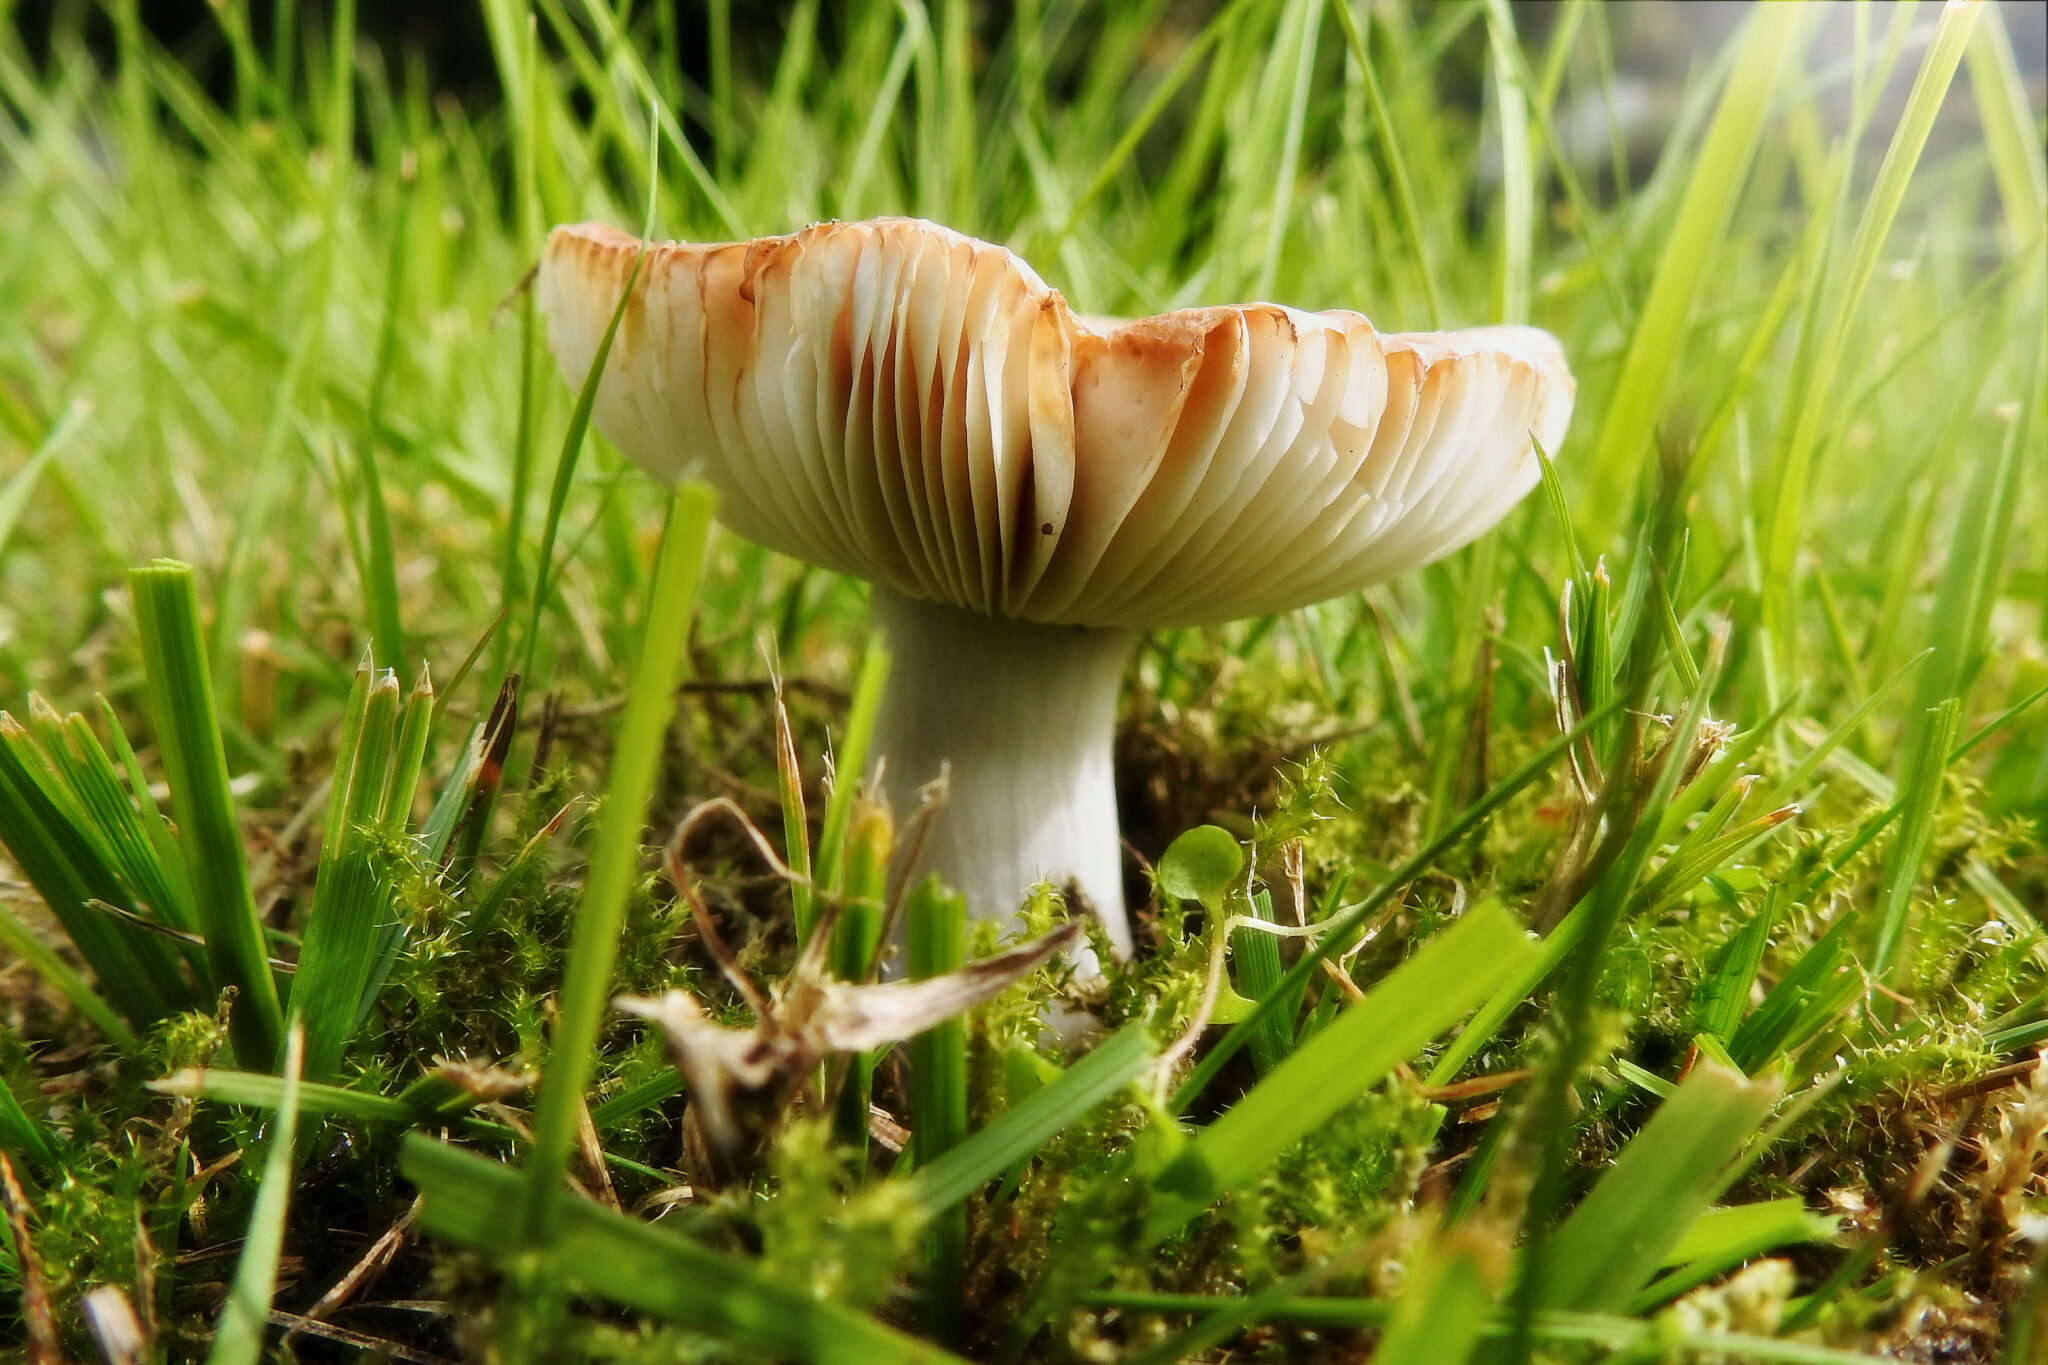 A fungi mushroom with white stem and exposed white gills found in grass